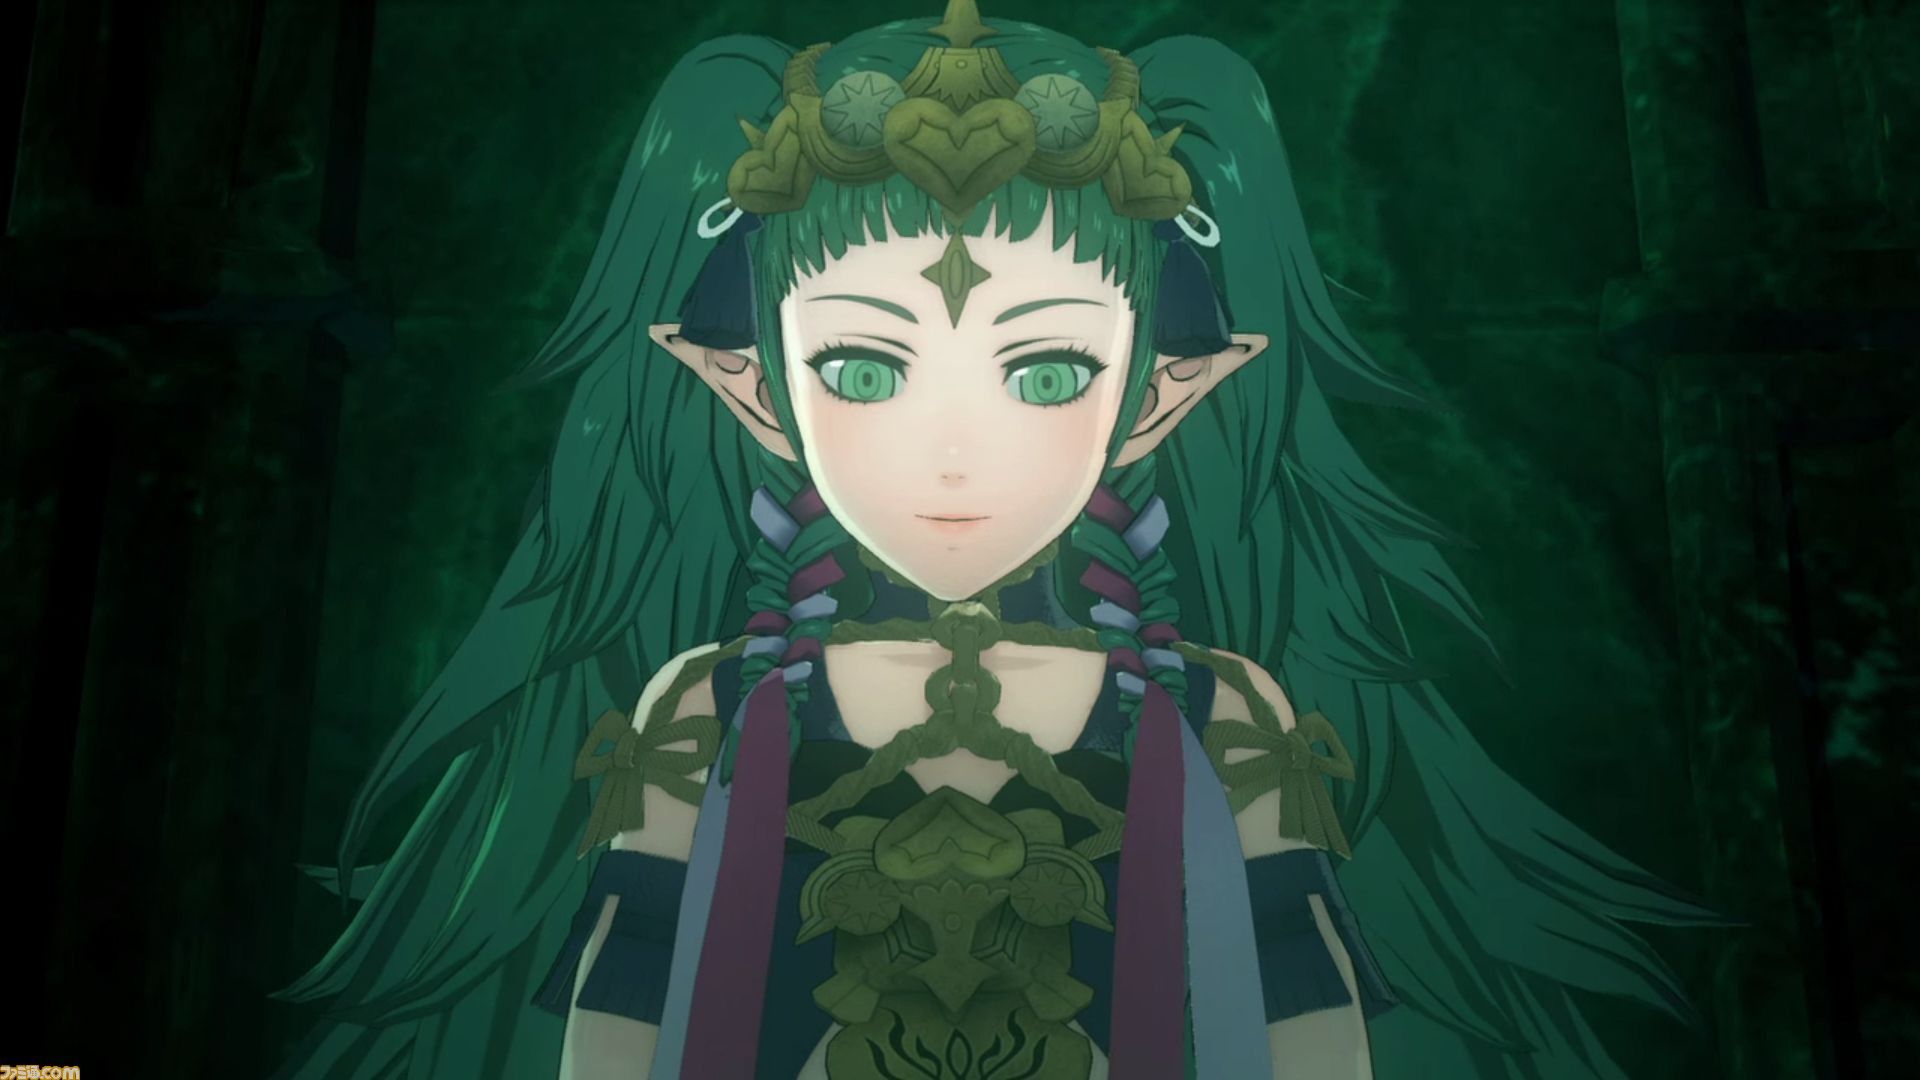 https://www.perfectly-nintendo.com/wp-content/uploads/sites/1/nggallery/fire-emblem-three-houses-25-04-2019-1/13.jpg